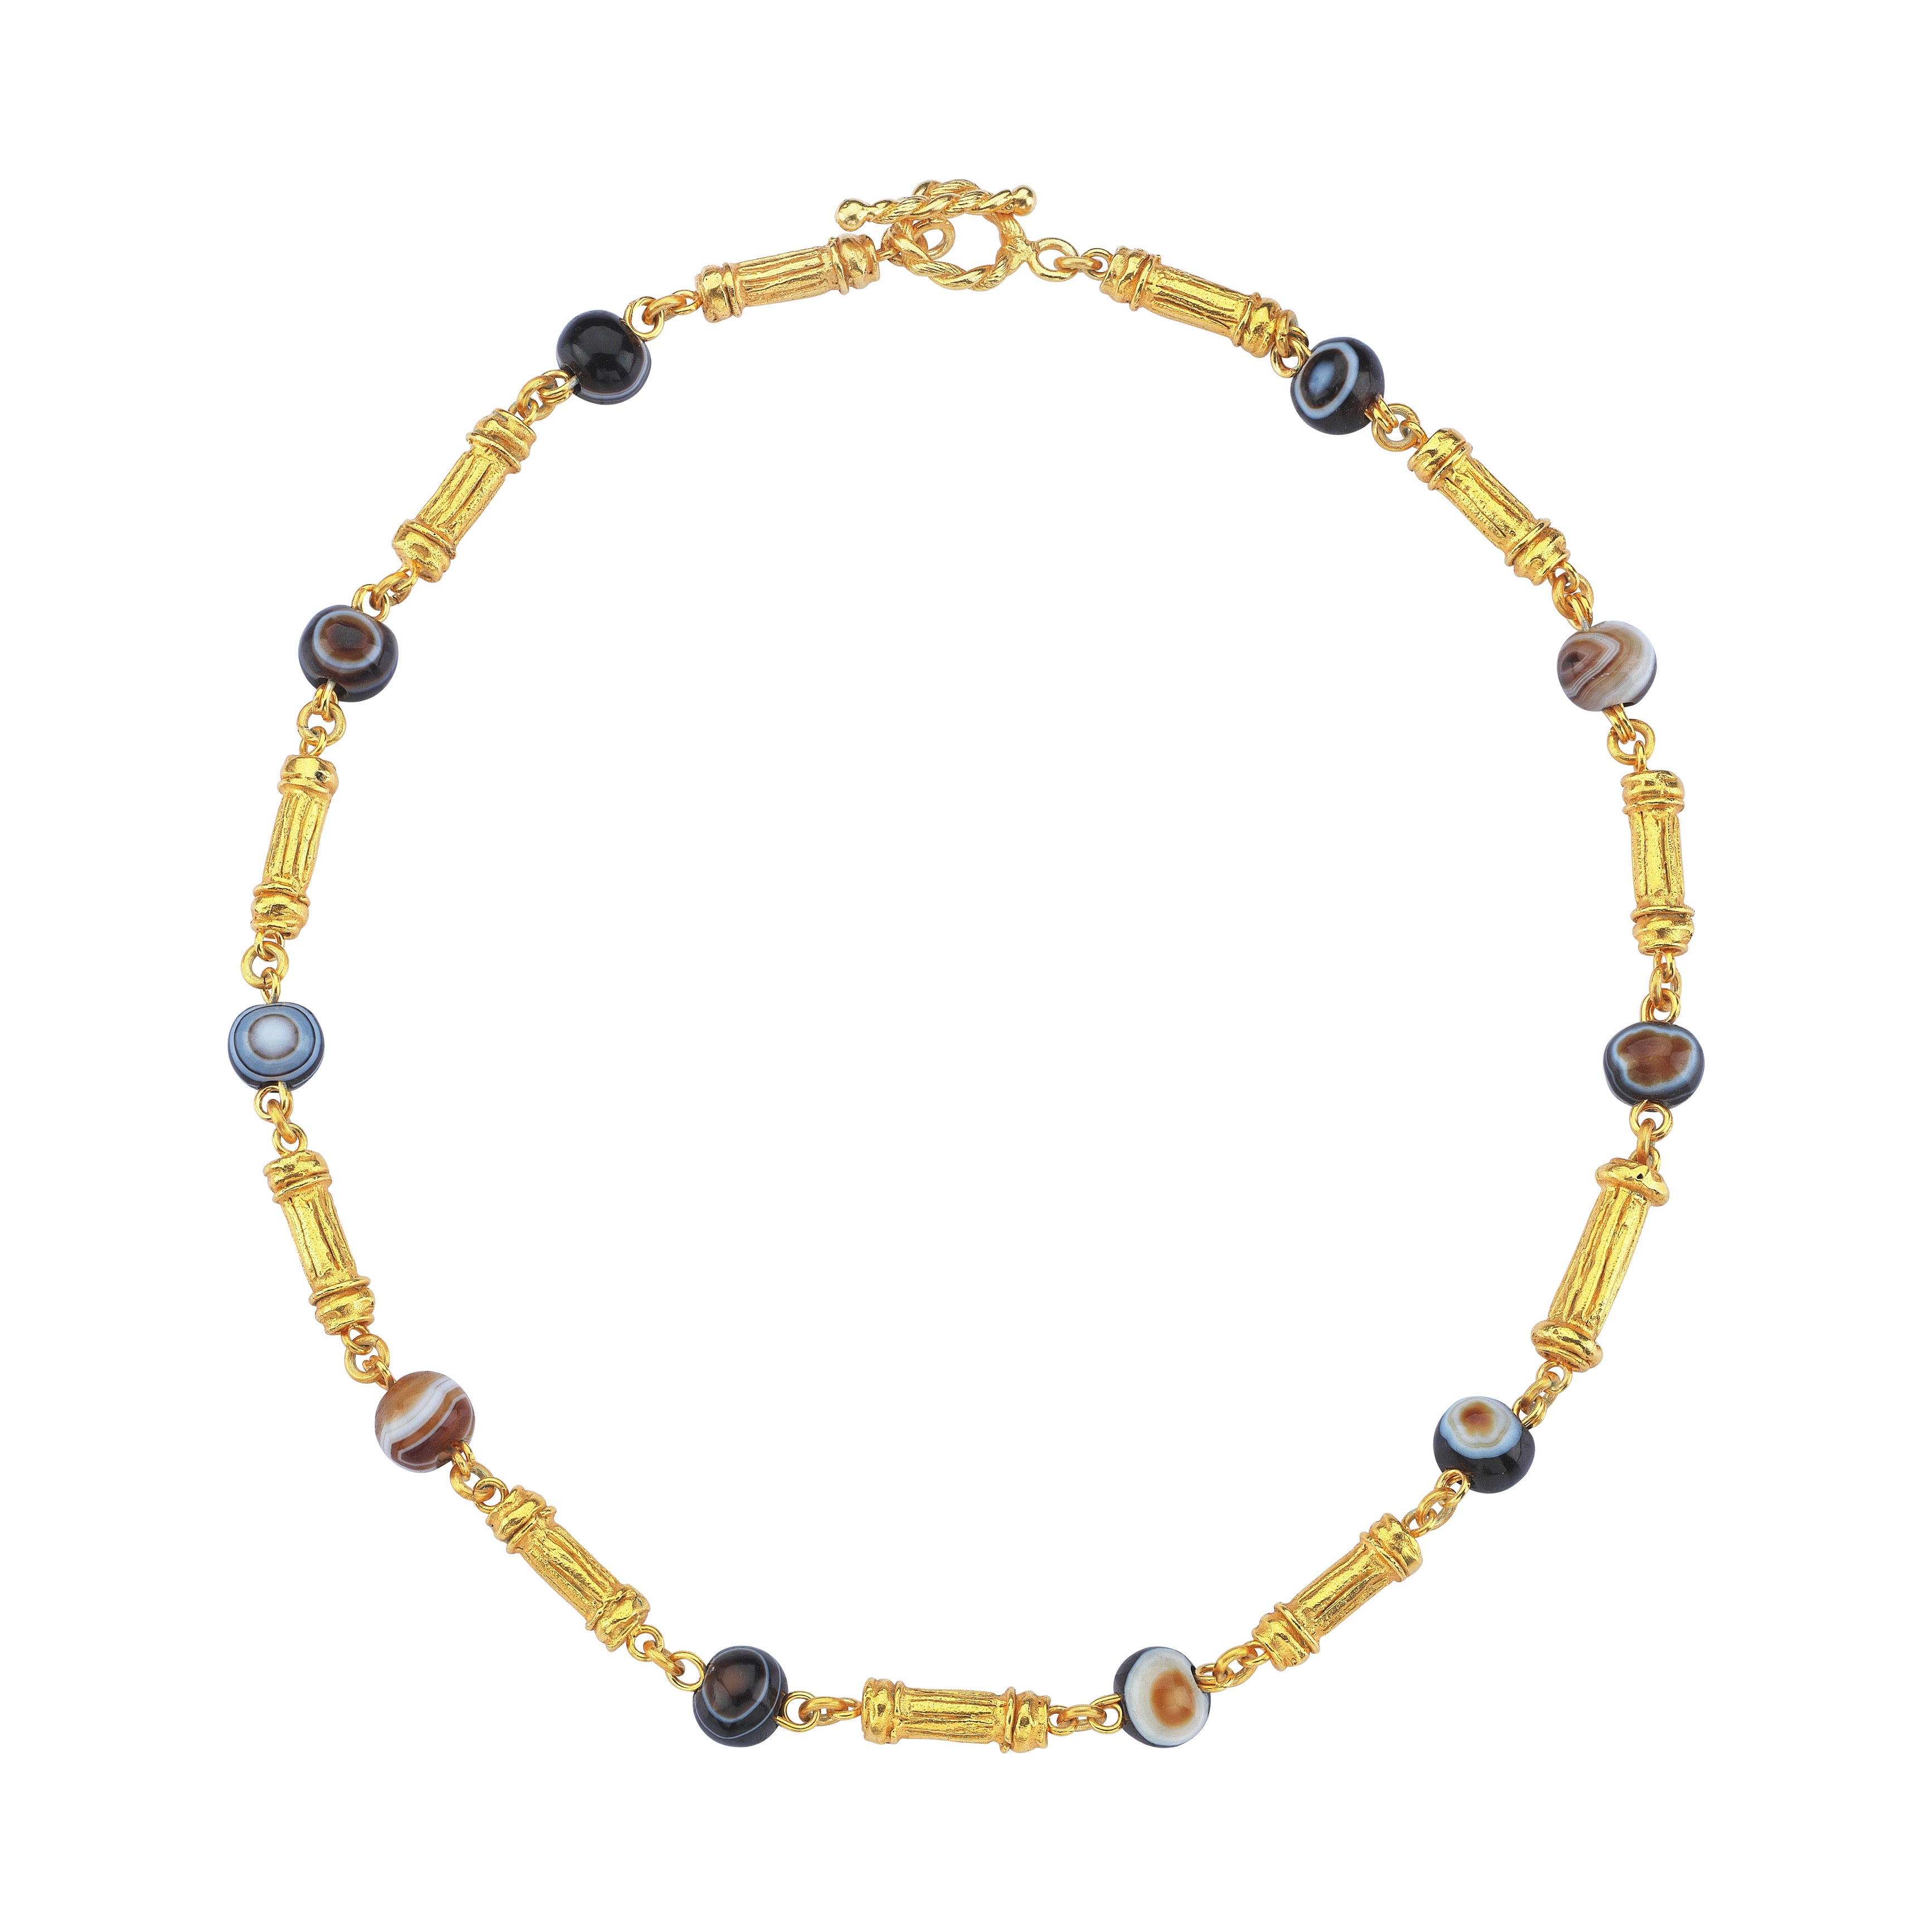 THE LYCIAN NECKLACE